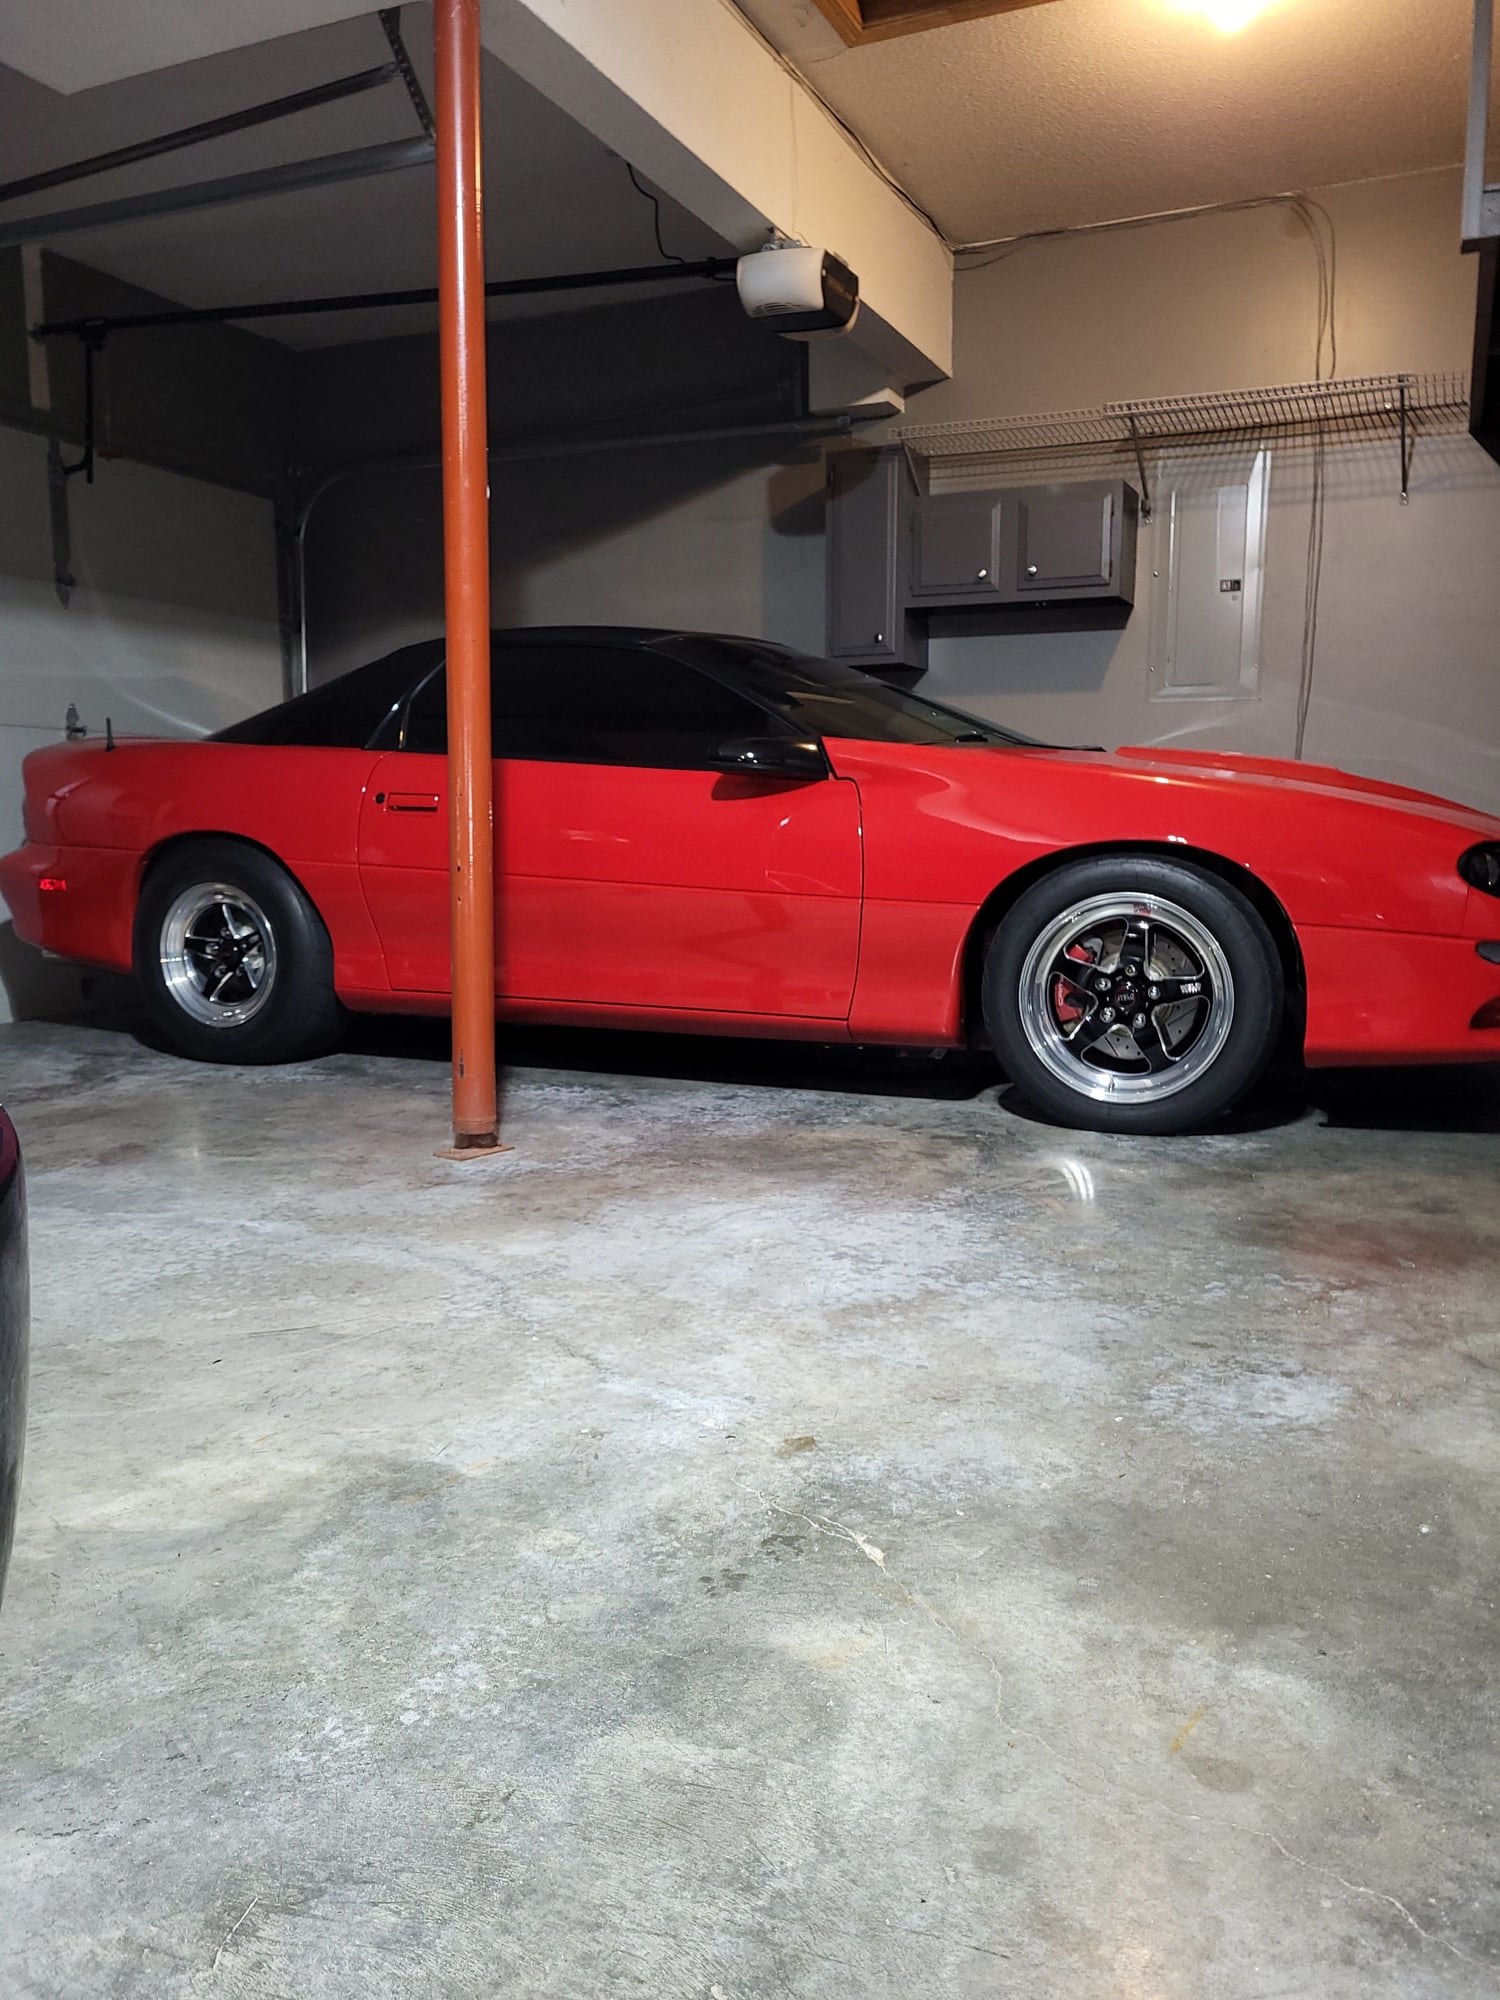 1999 Chevrolet Camaro - 99 low mileage built 388 - Used - VIN 2G1FP22G9X2134986 - 62,200 Miles - 8 cyl - 2WD - Automatic - Coupe - Red - Kearney, MO 64060, United States